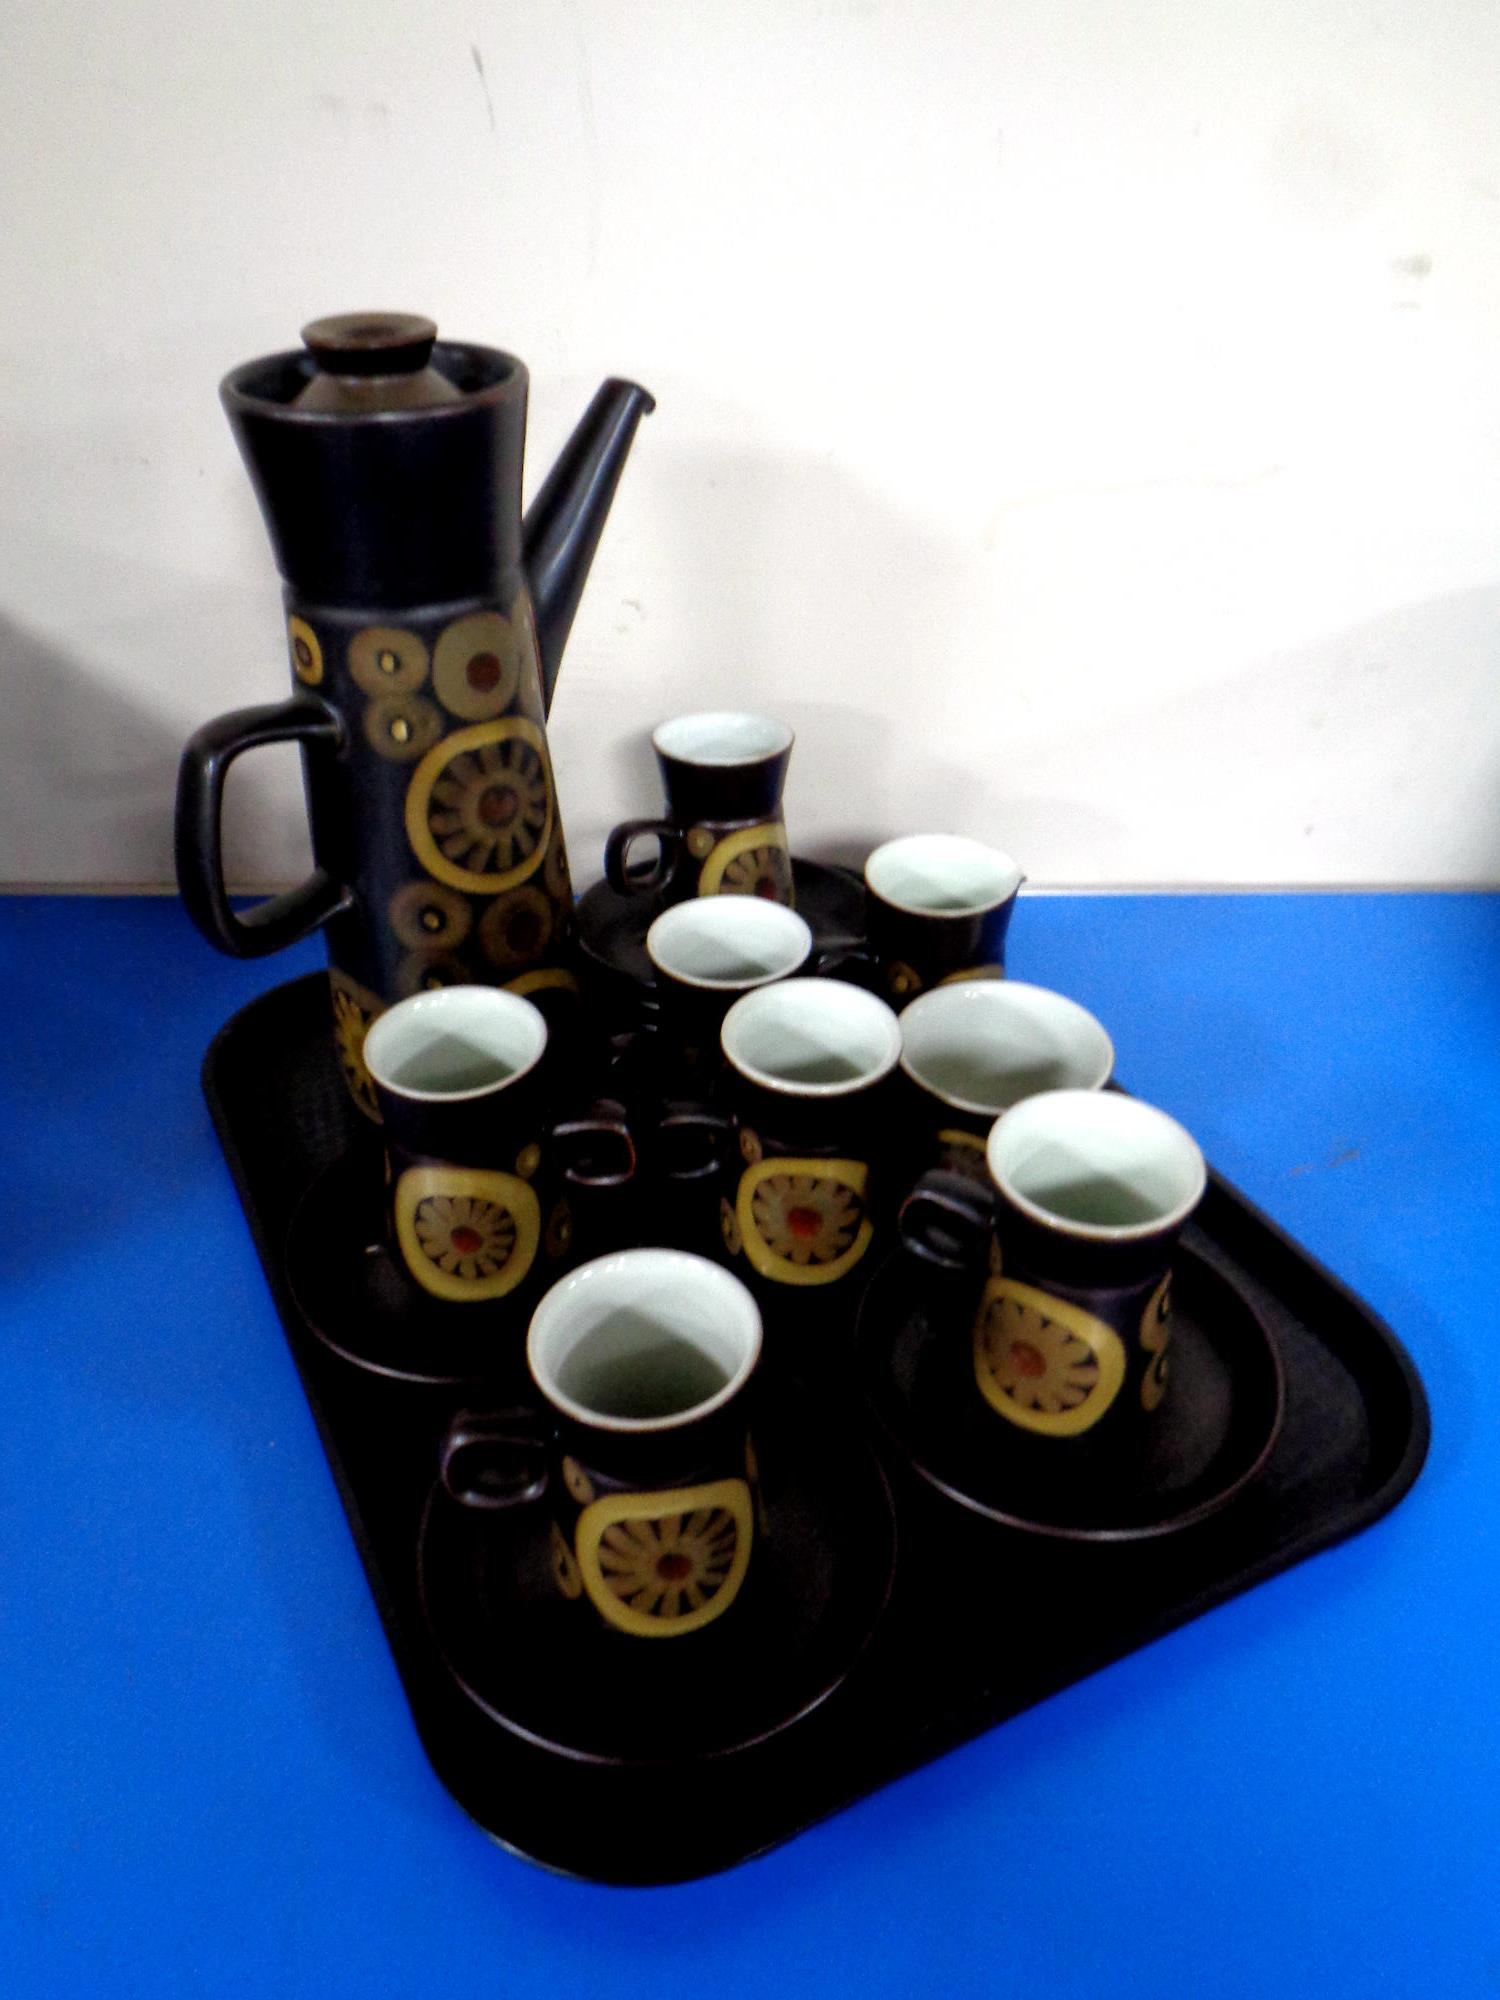 A tray containing a 15 piece Denby pottery coffee service